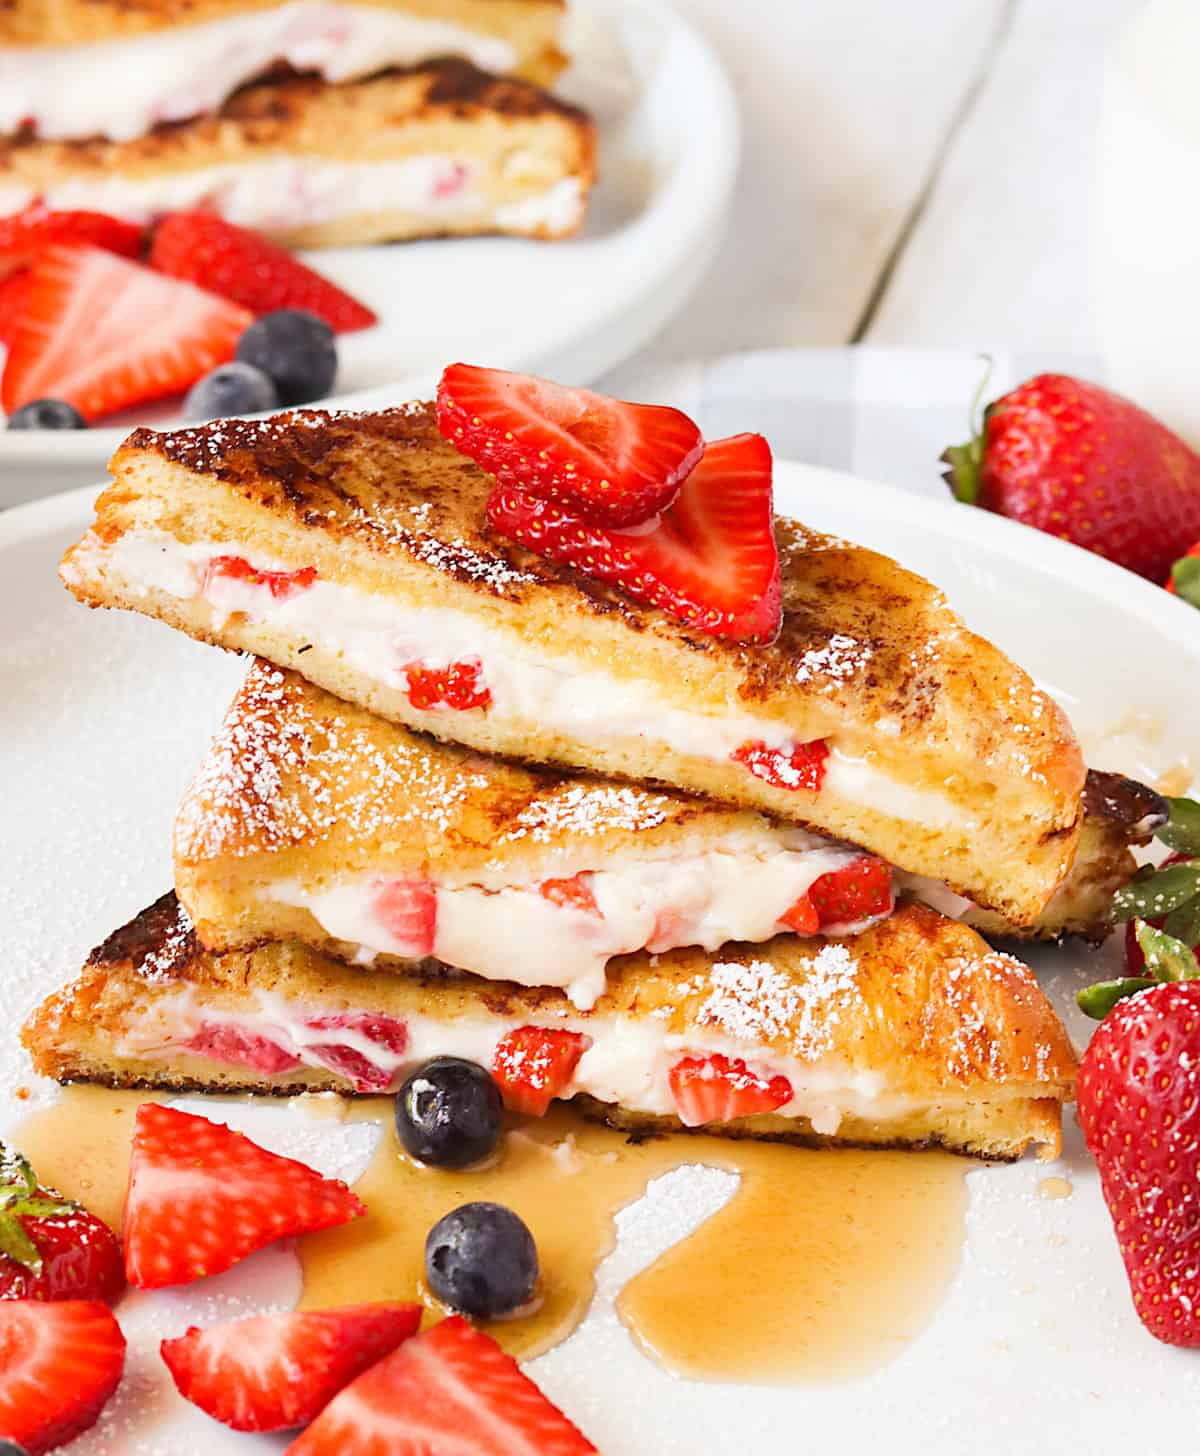 French toast stuffed with maple syrup